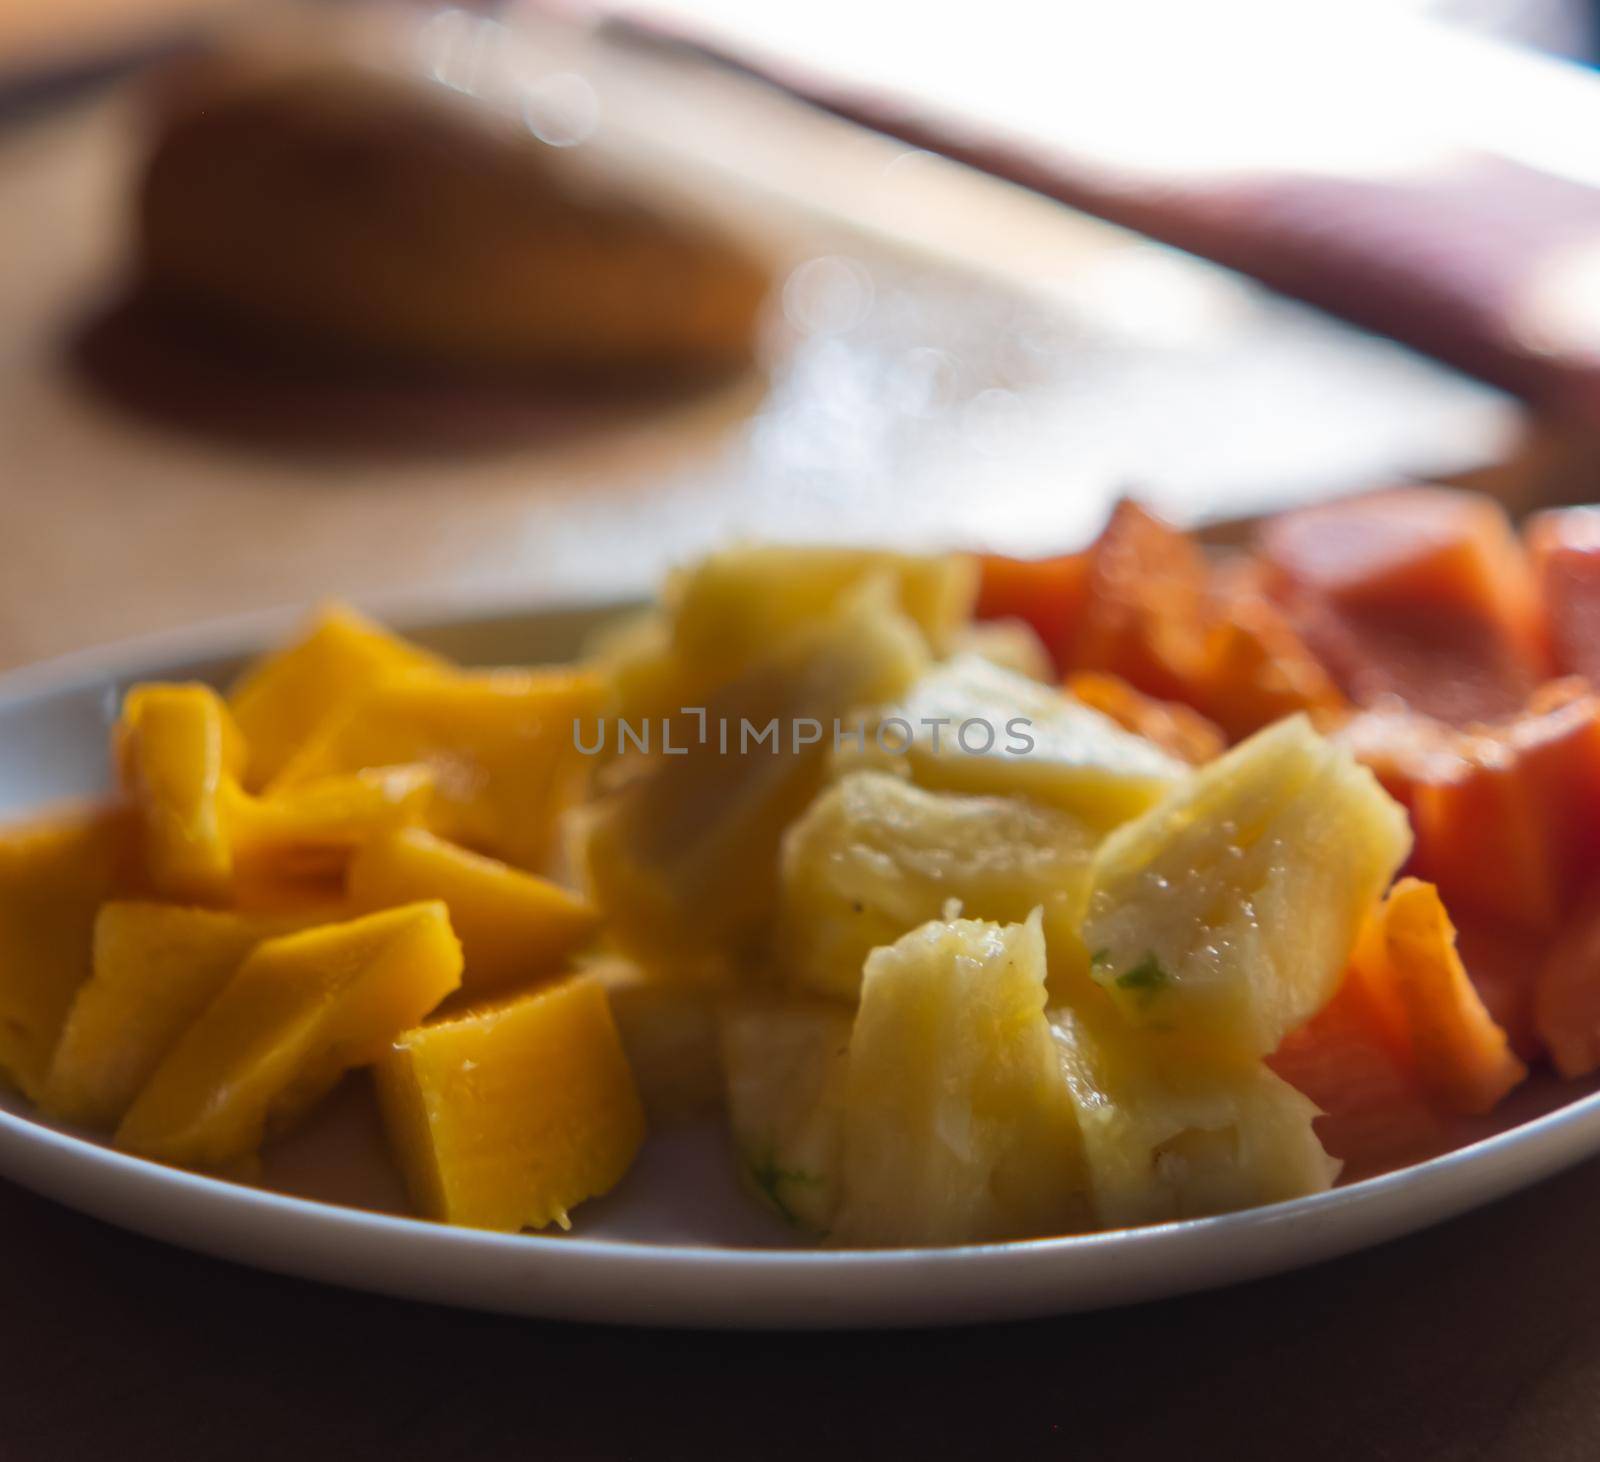 Close-up of white plate of mango, pineapple, and papaya slices on table with blurry and bright background. Tasty and fresh sliced fruit on an oval porcelain plate. Healthy food and breakfast